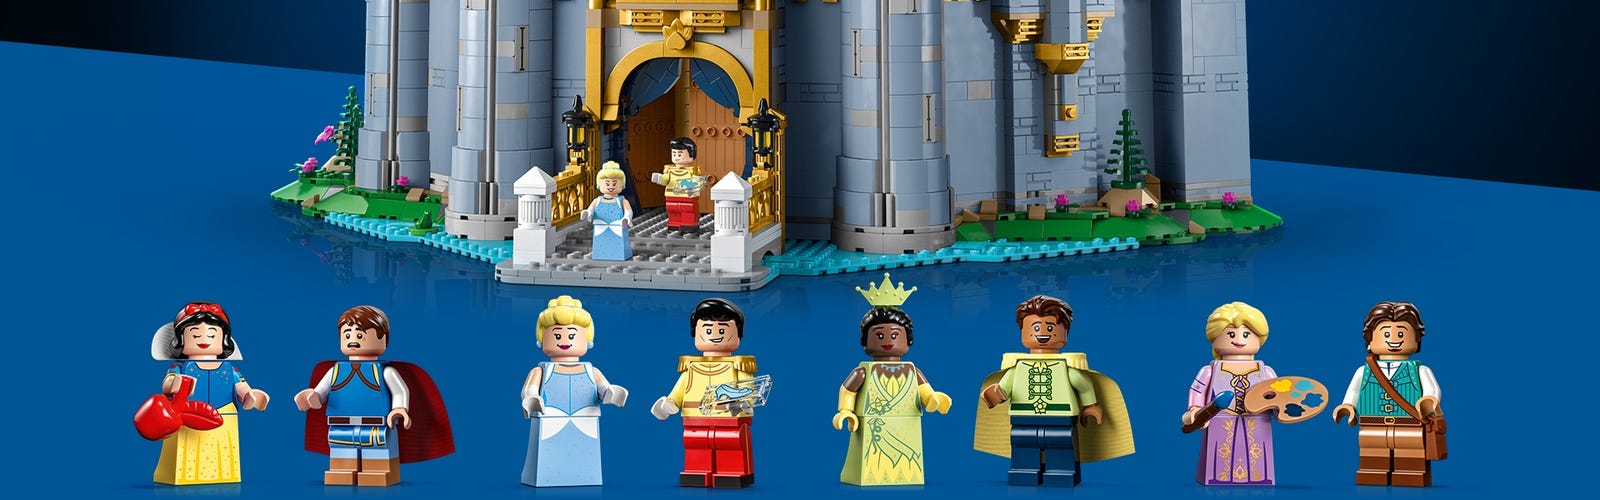 New Disney100 LEGO Sets Inspired by Animation Icons, Villains, and Disney  Duos Coming Soon - Disneyland News Today